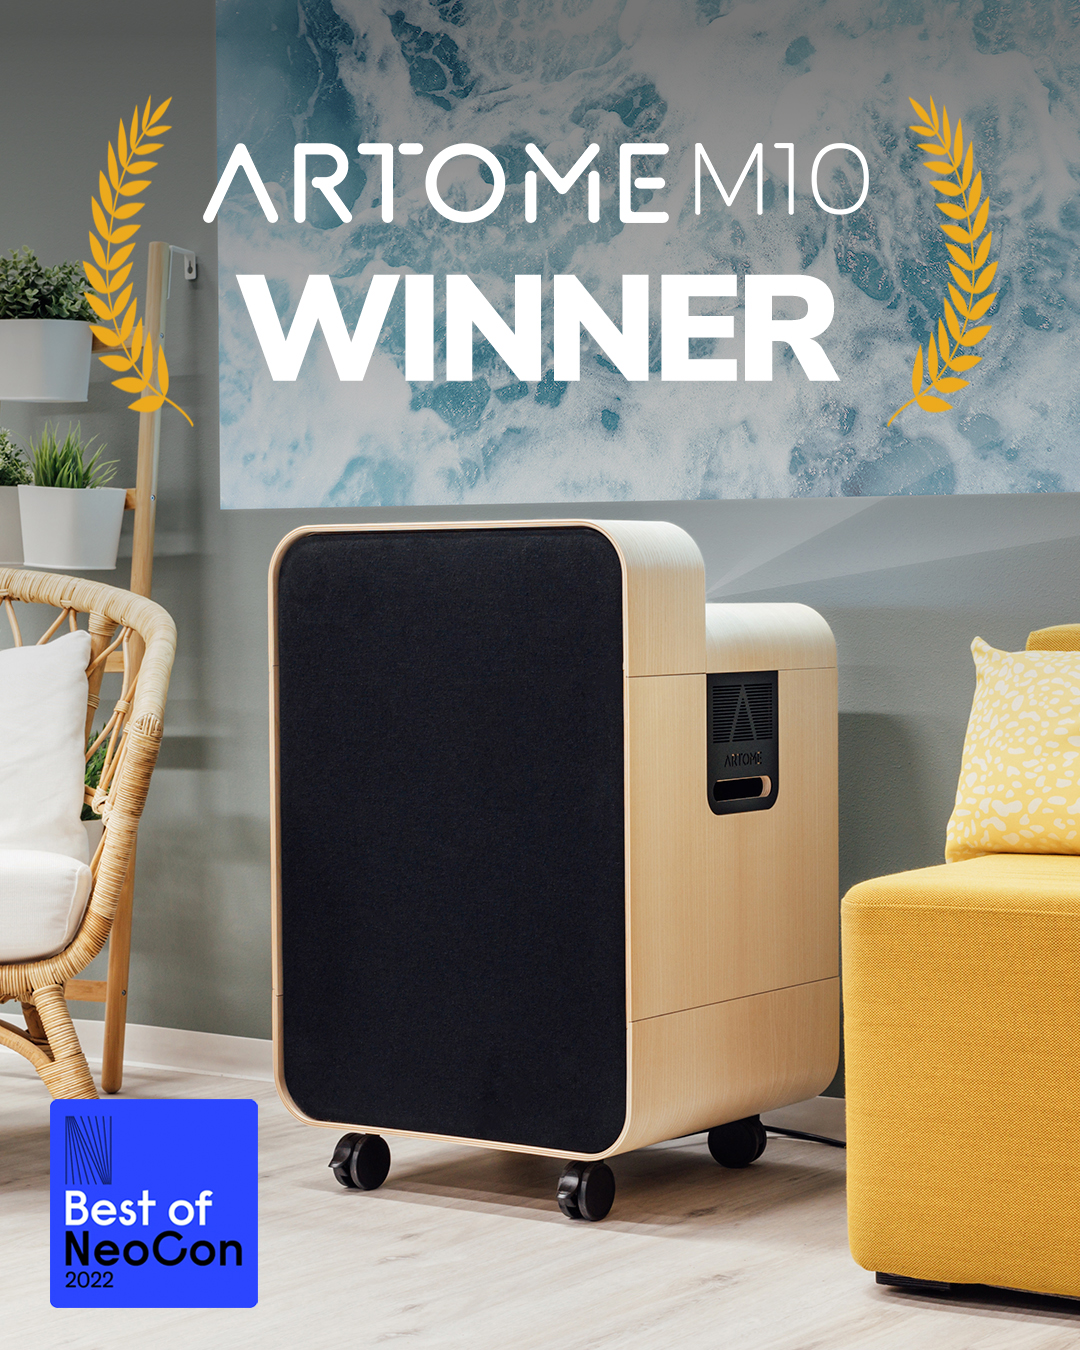 Artome M10 is the winner in the best of NeoCon competition..